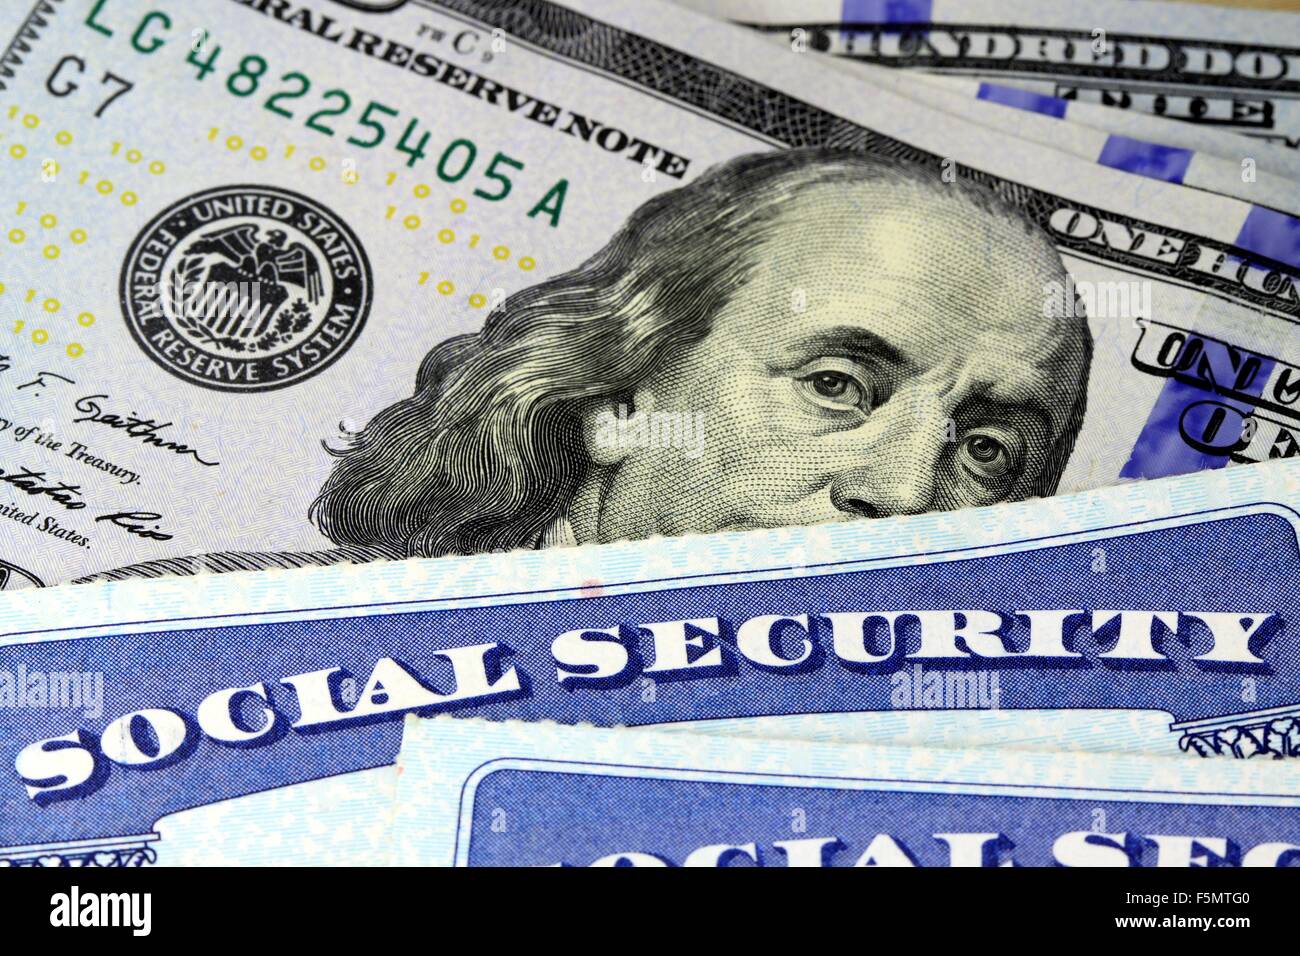 Social security card and US currency one hundred dollar bill Stock Photo